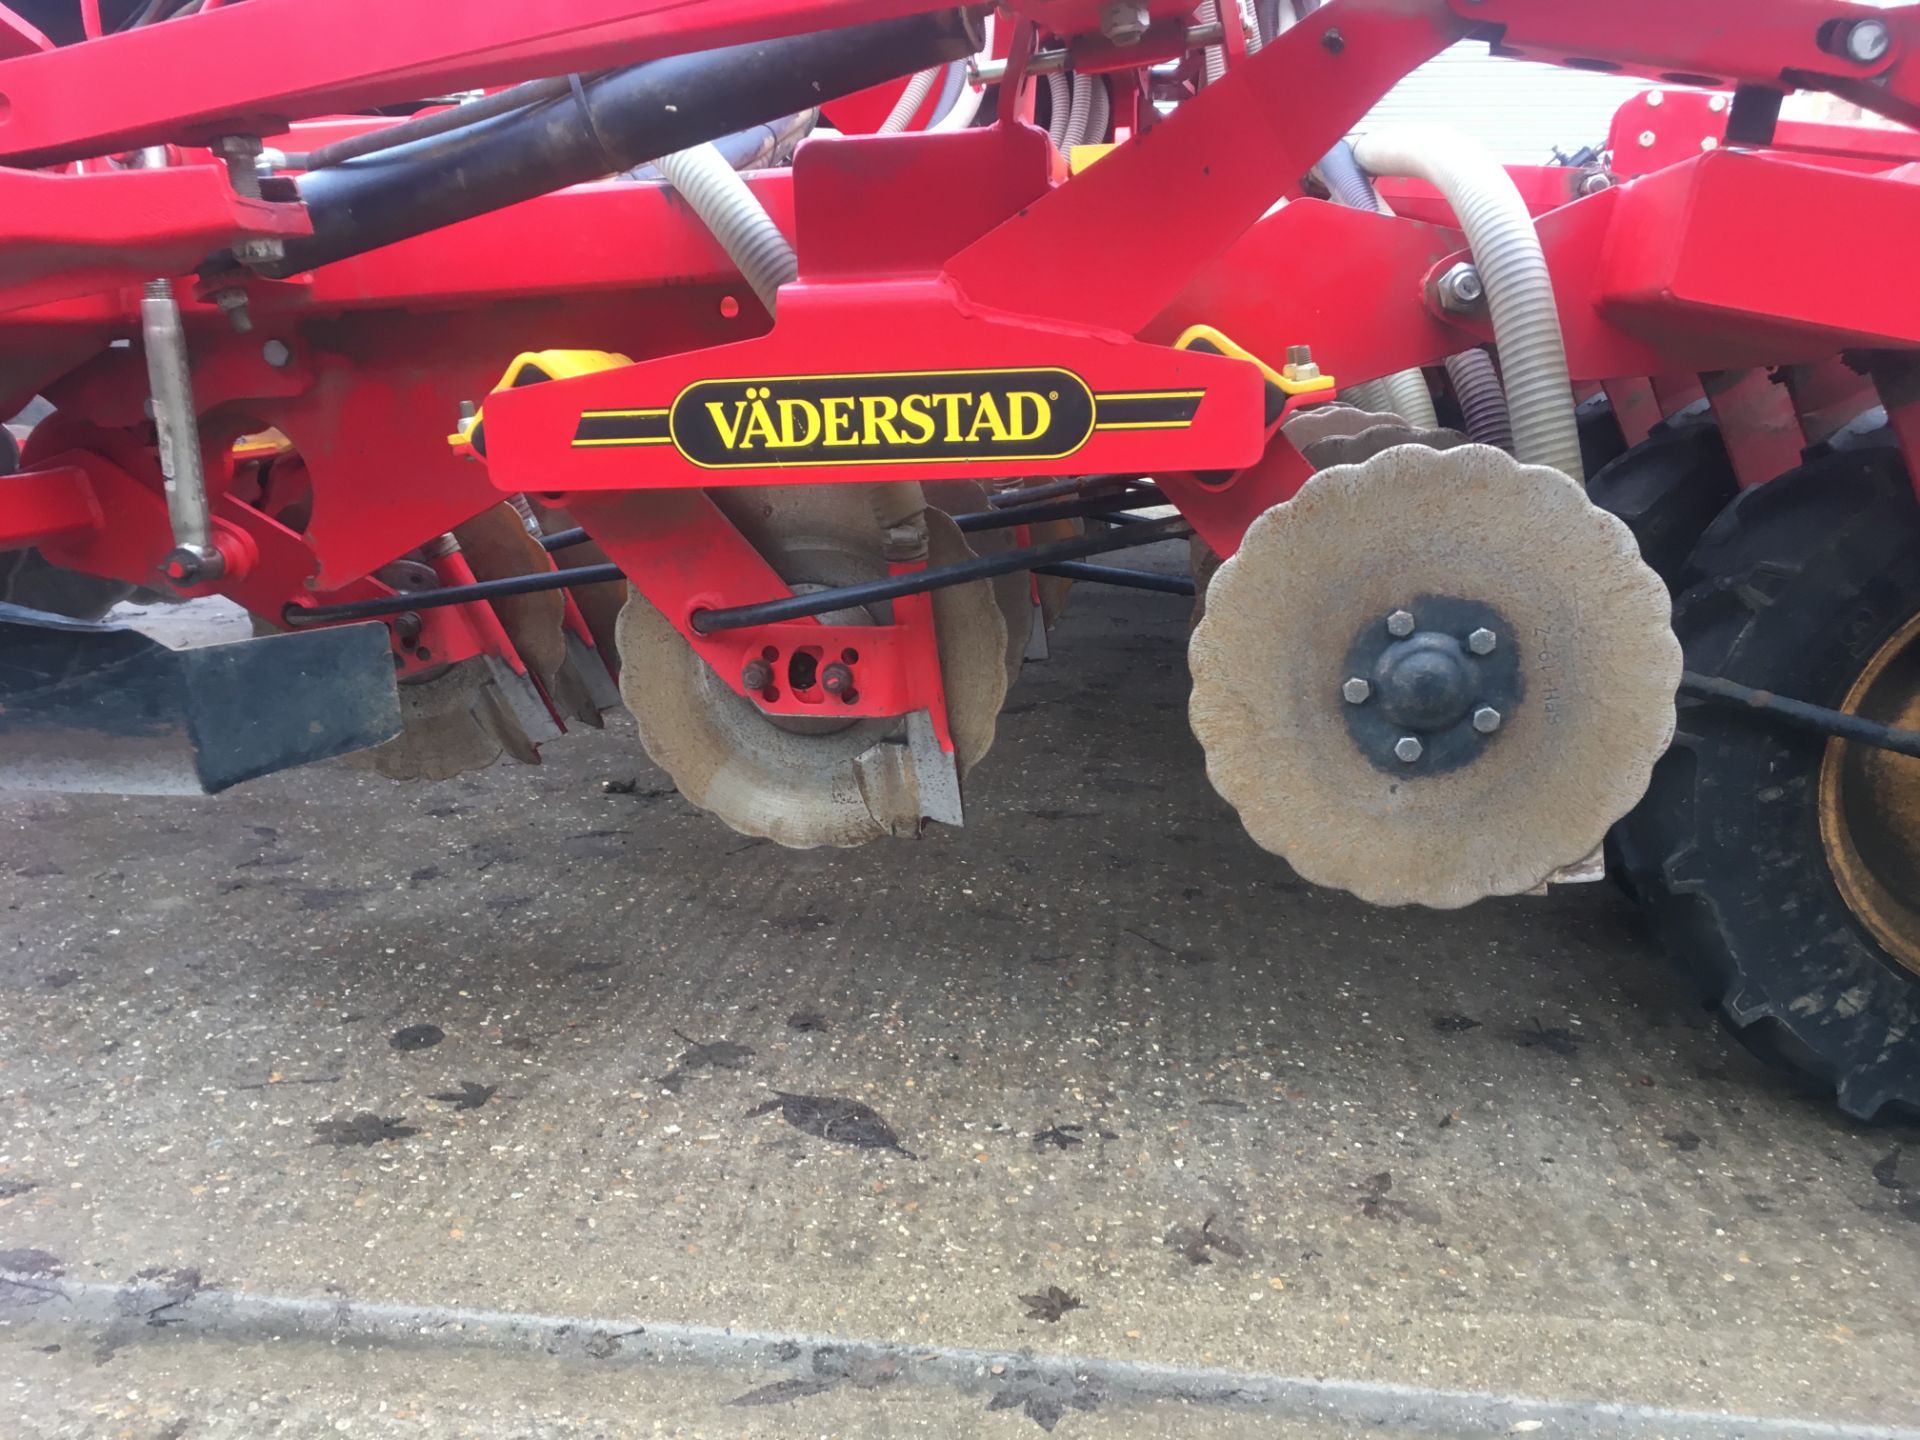 Vaderstad Rapid A600S Drill (07), Serial No. 14277, Location - Sandy, Bedfordshire - Image 3 of 11